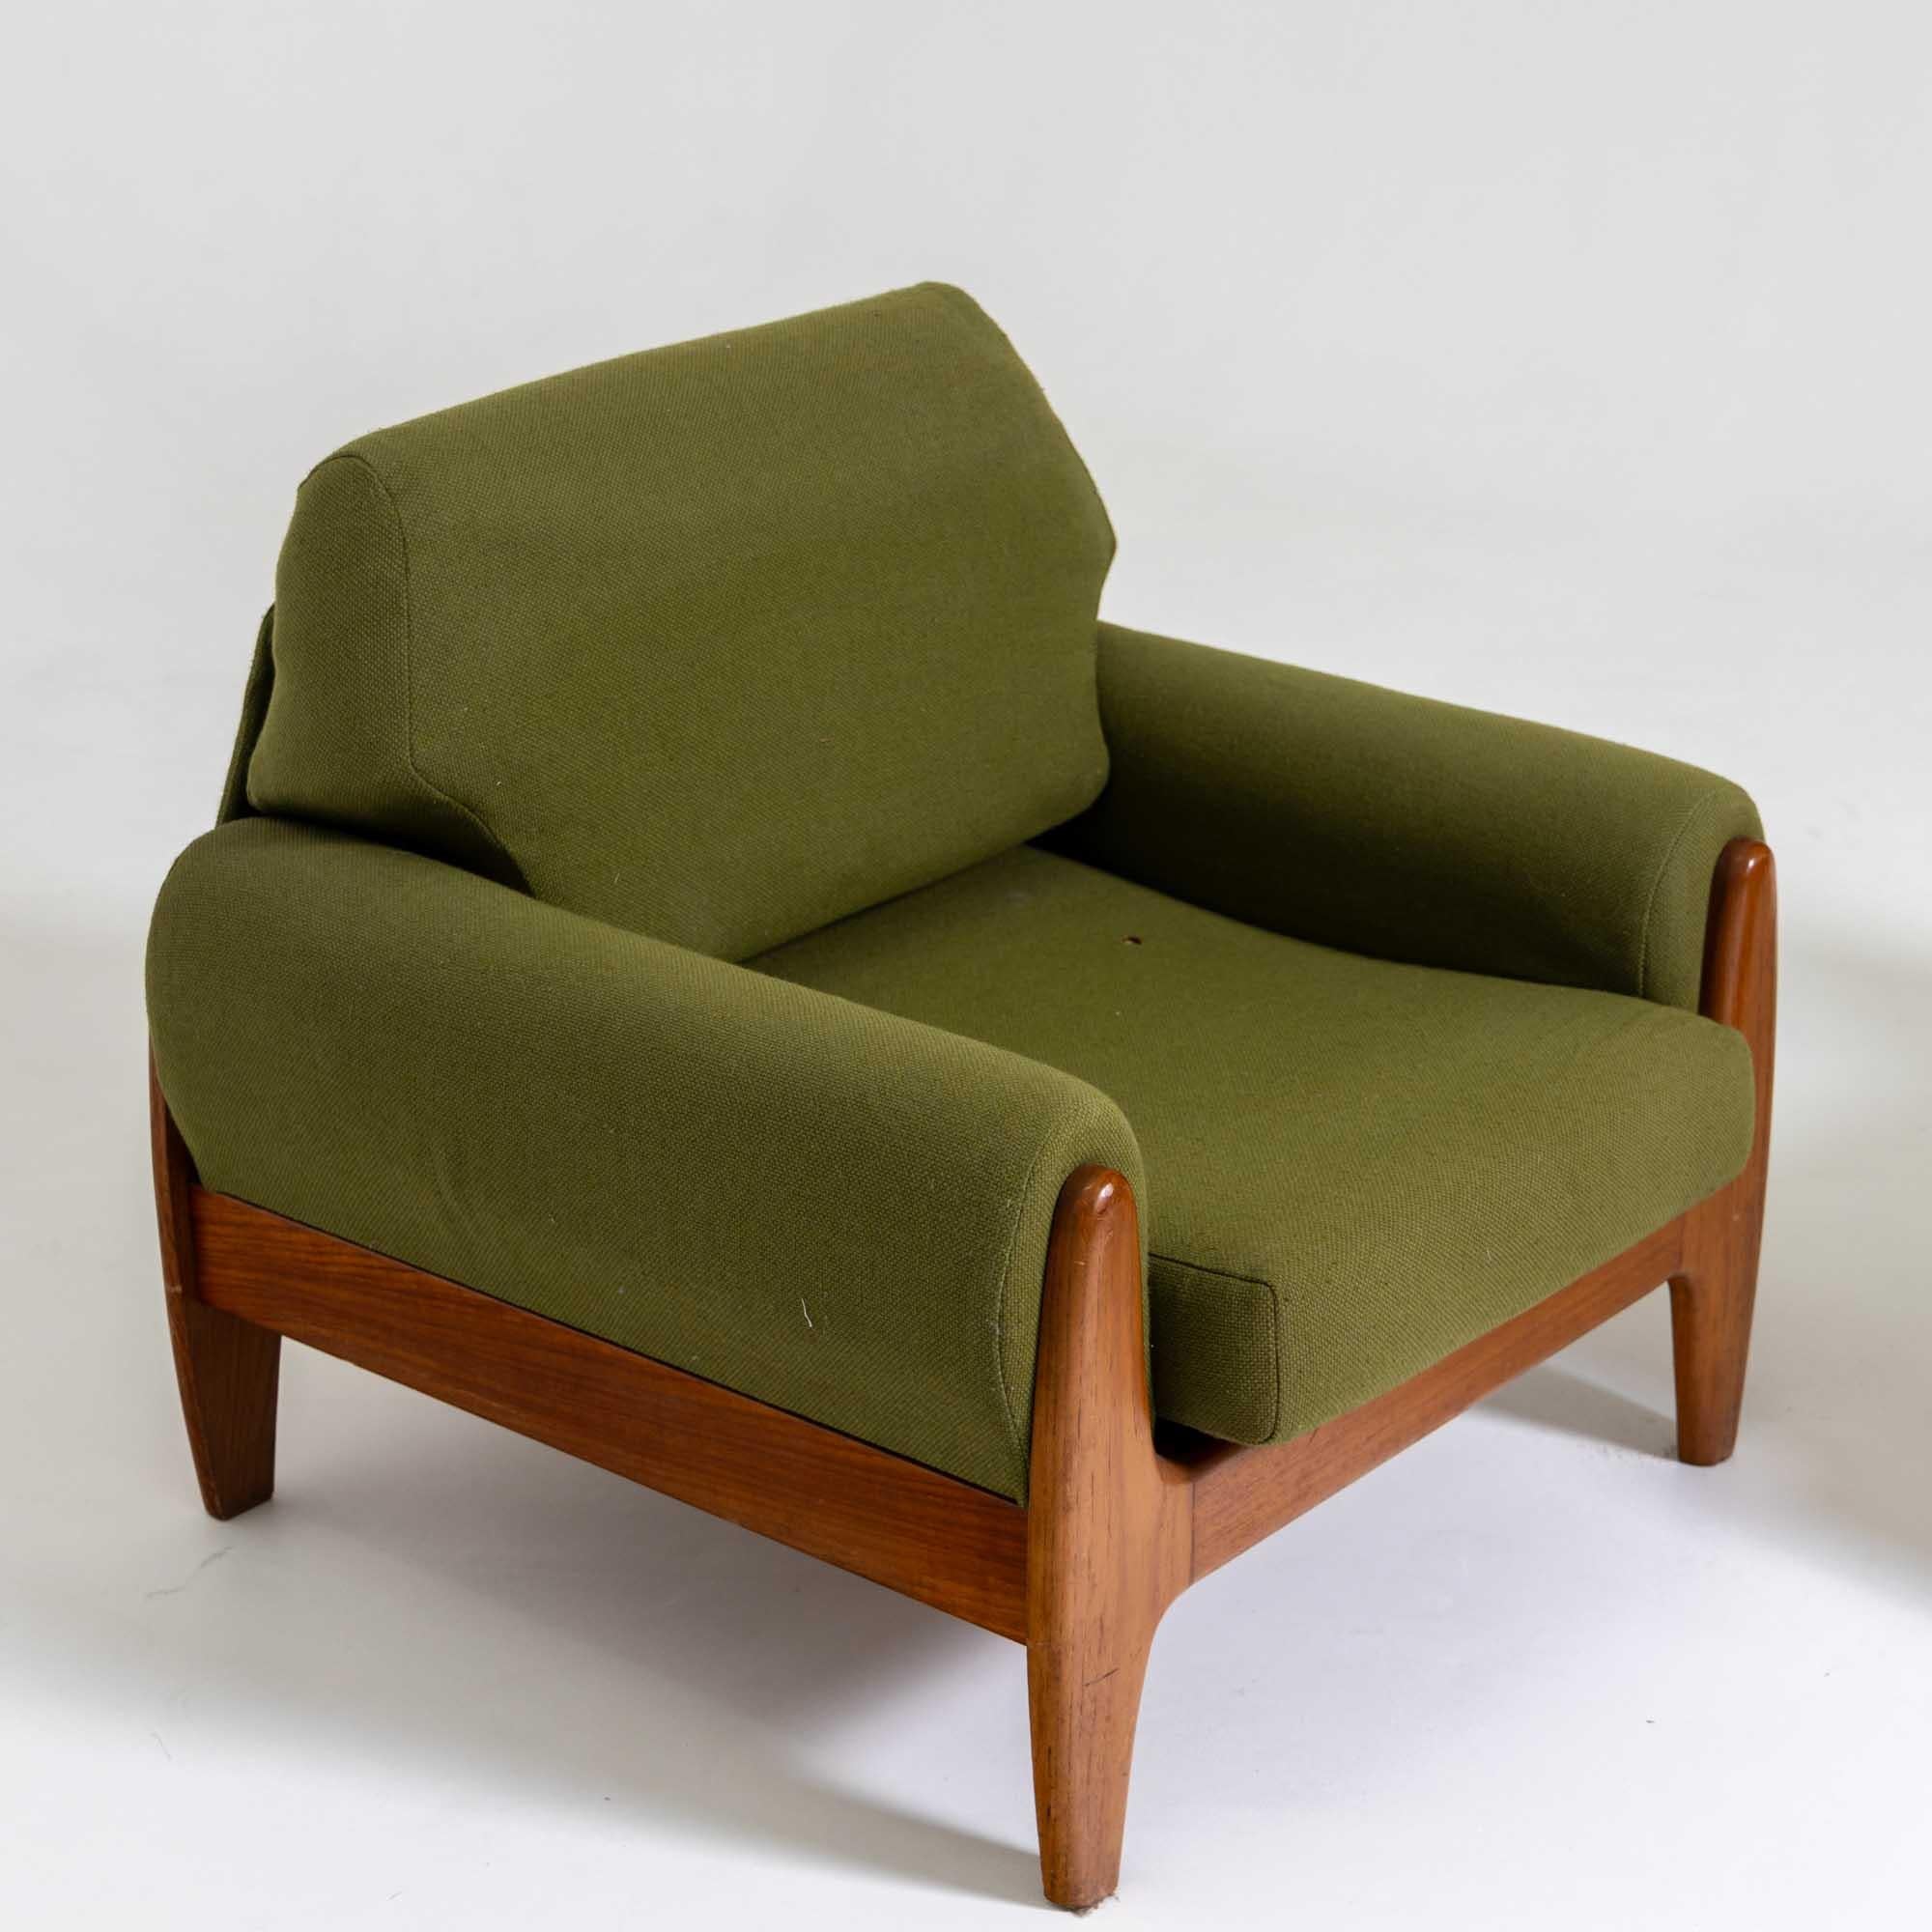 Mid-Century Modern Pair of Armchairs with Green Upholstery, by Illum Denmark, Mid-20th Century For Sale